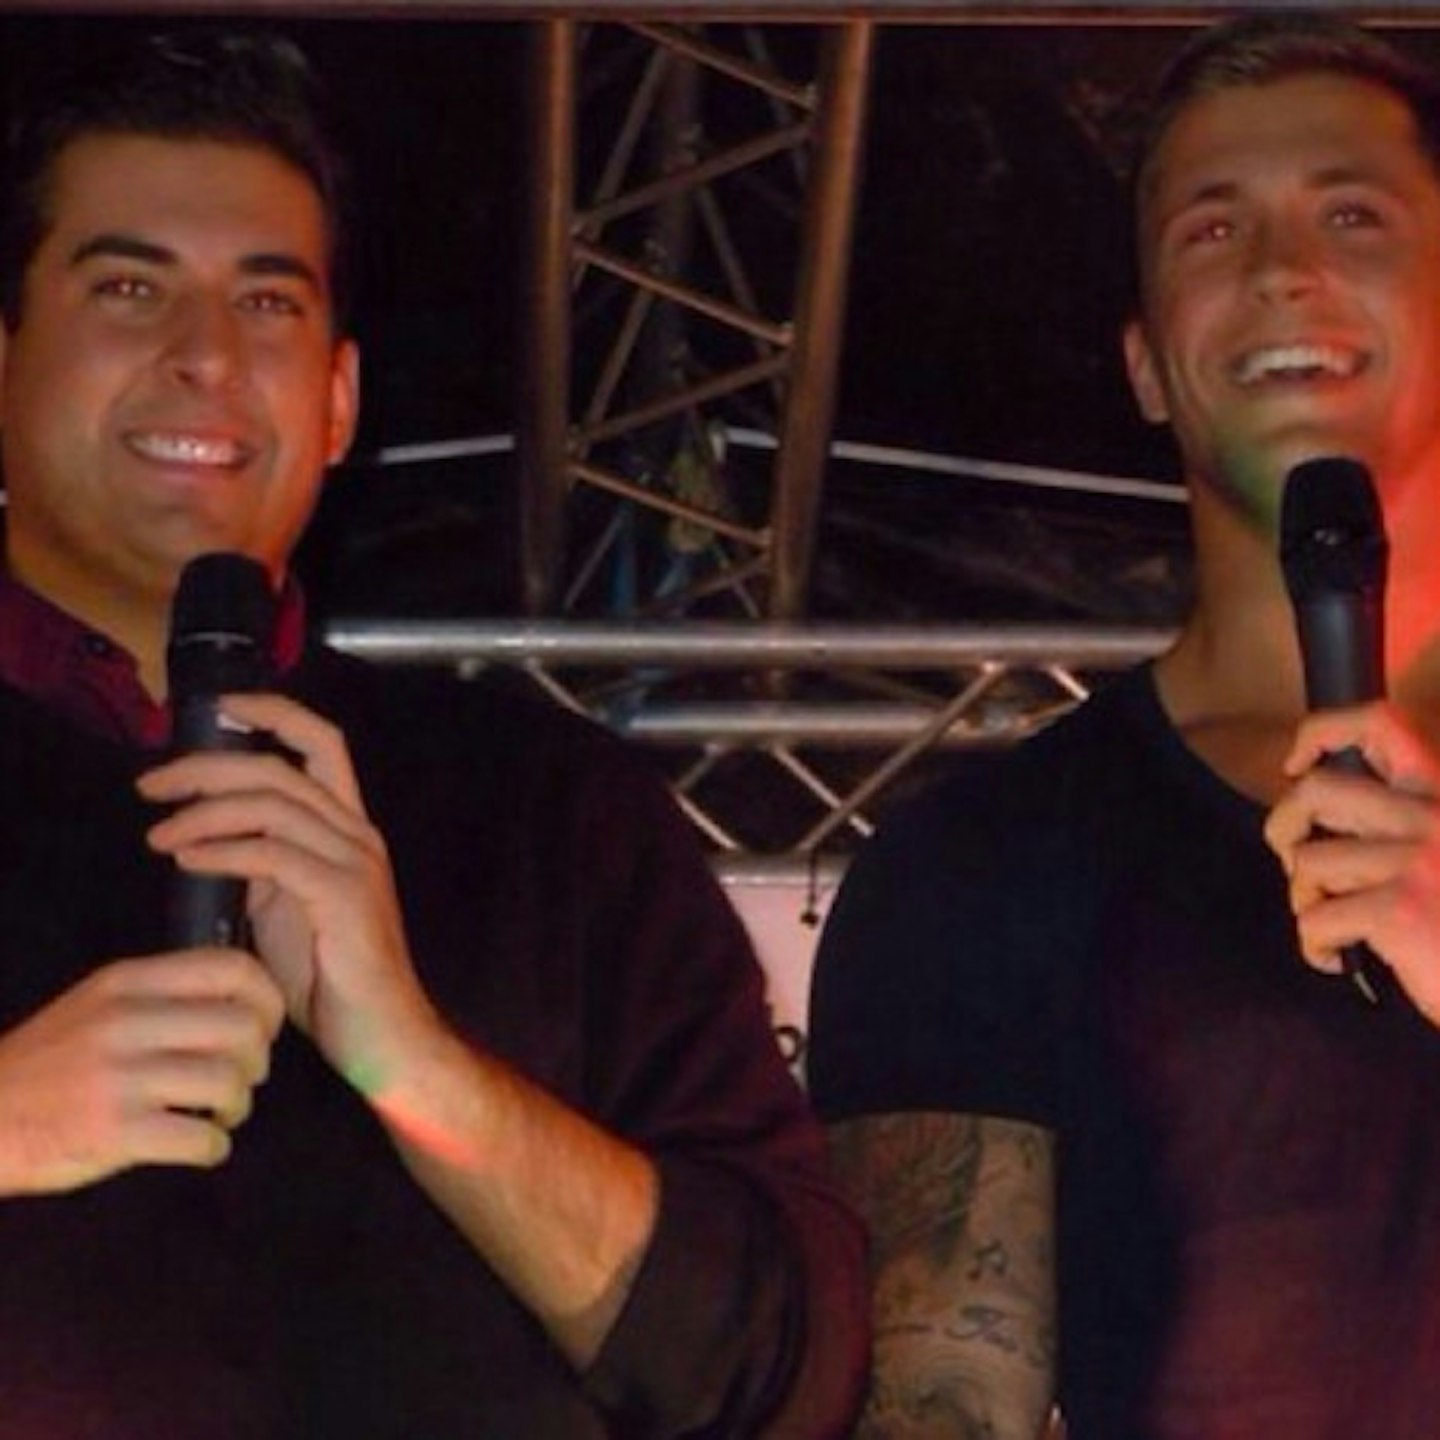 Dan and Arg will not be appearing in Magaluf now